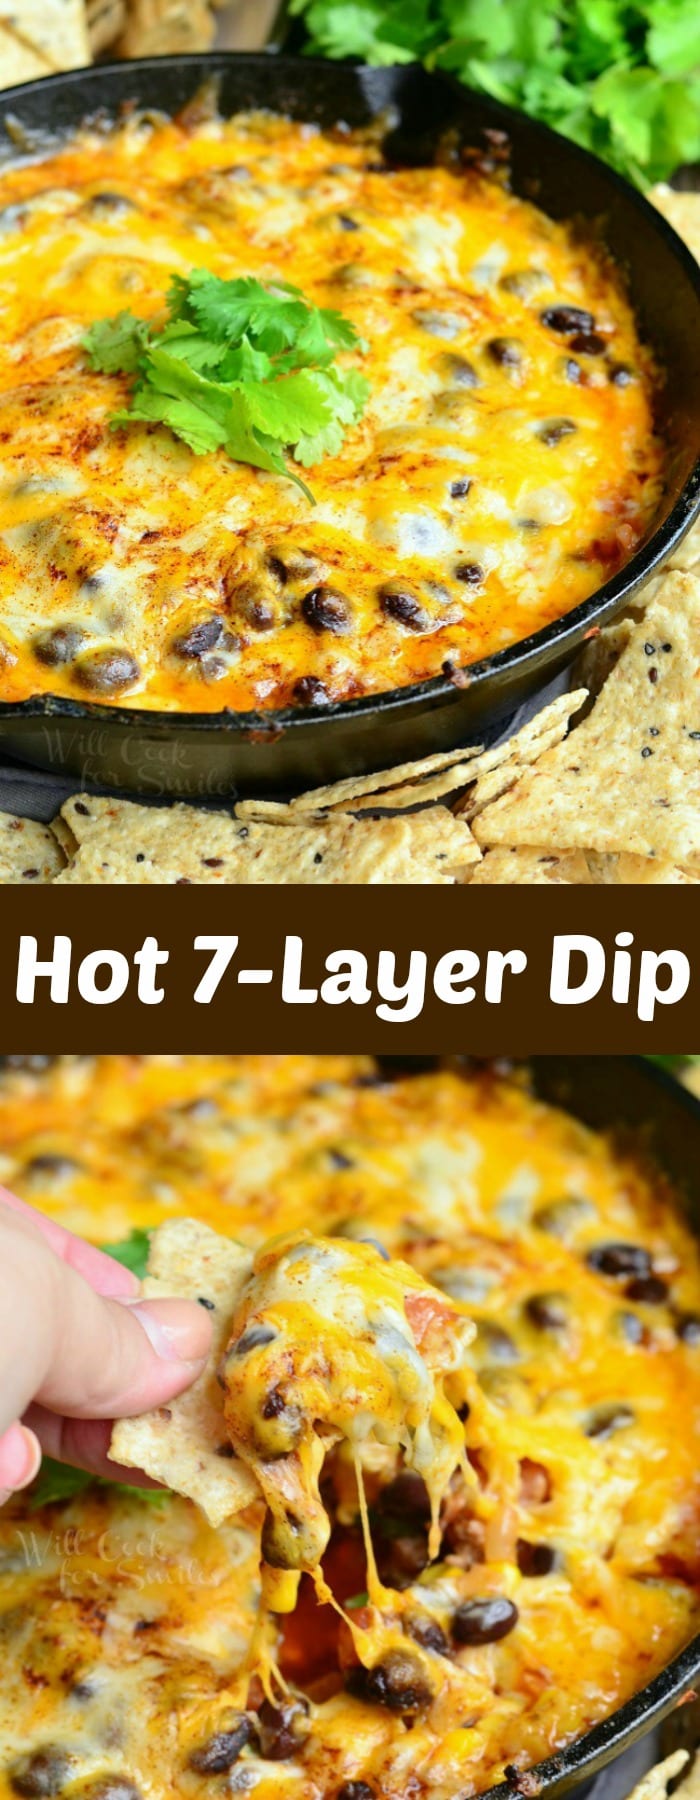 7 Layer Dip!Icheesy, beefy dip in a skillet with layers of beef, veggies, and cheese. collage 